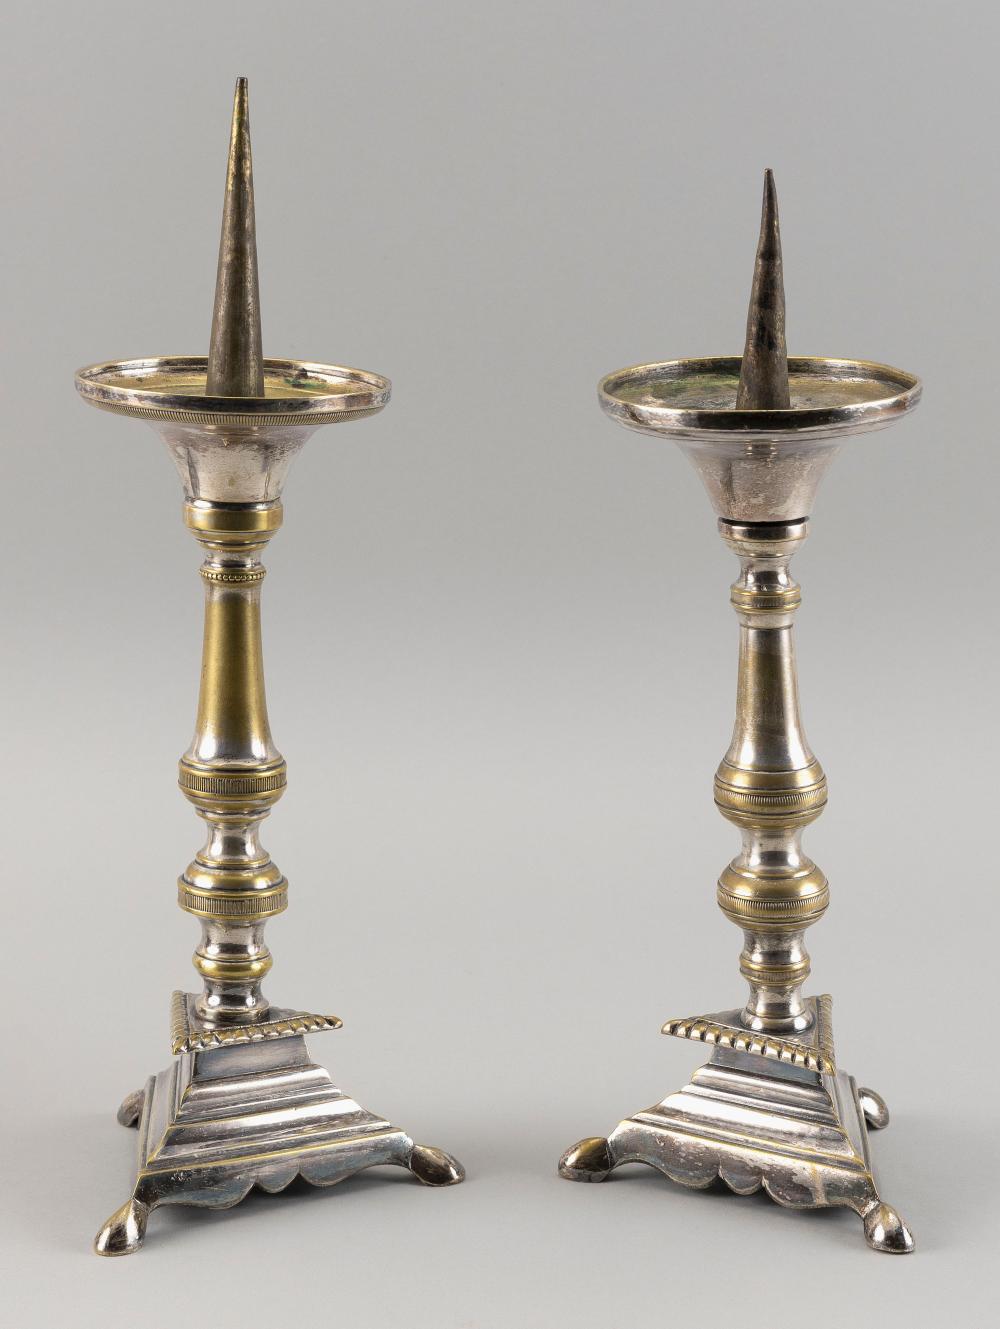 ASSEMBLED PAIR OF BRASS PRICKET 34c030